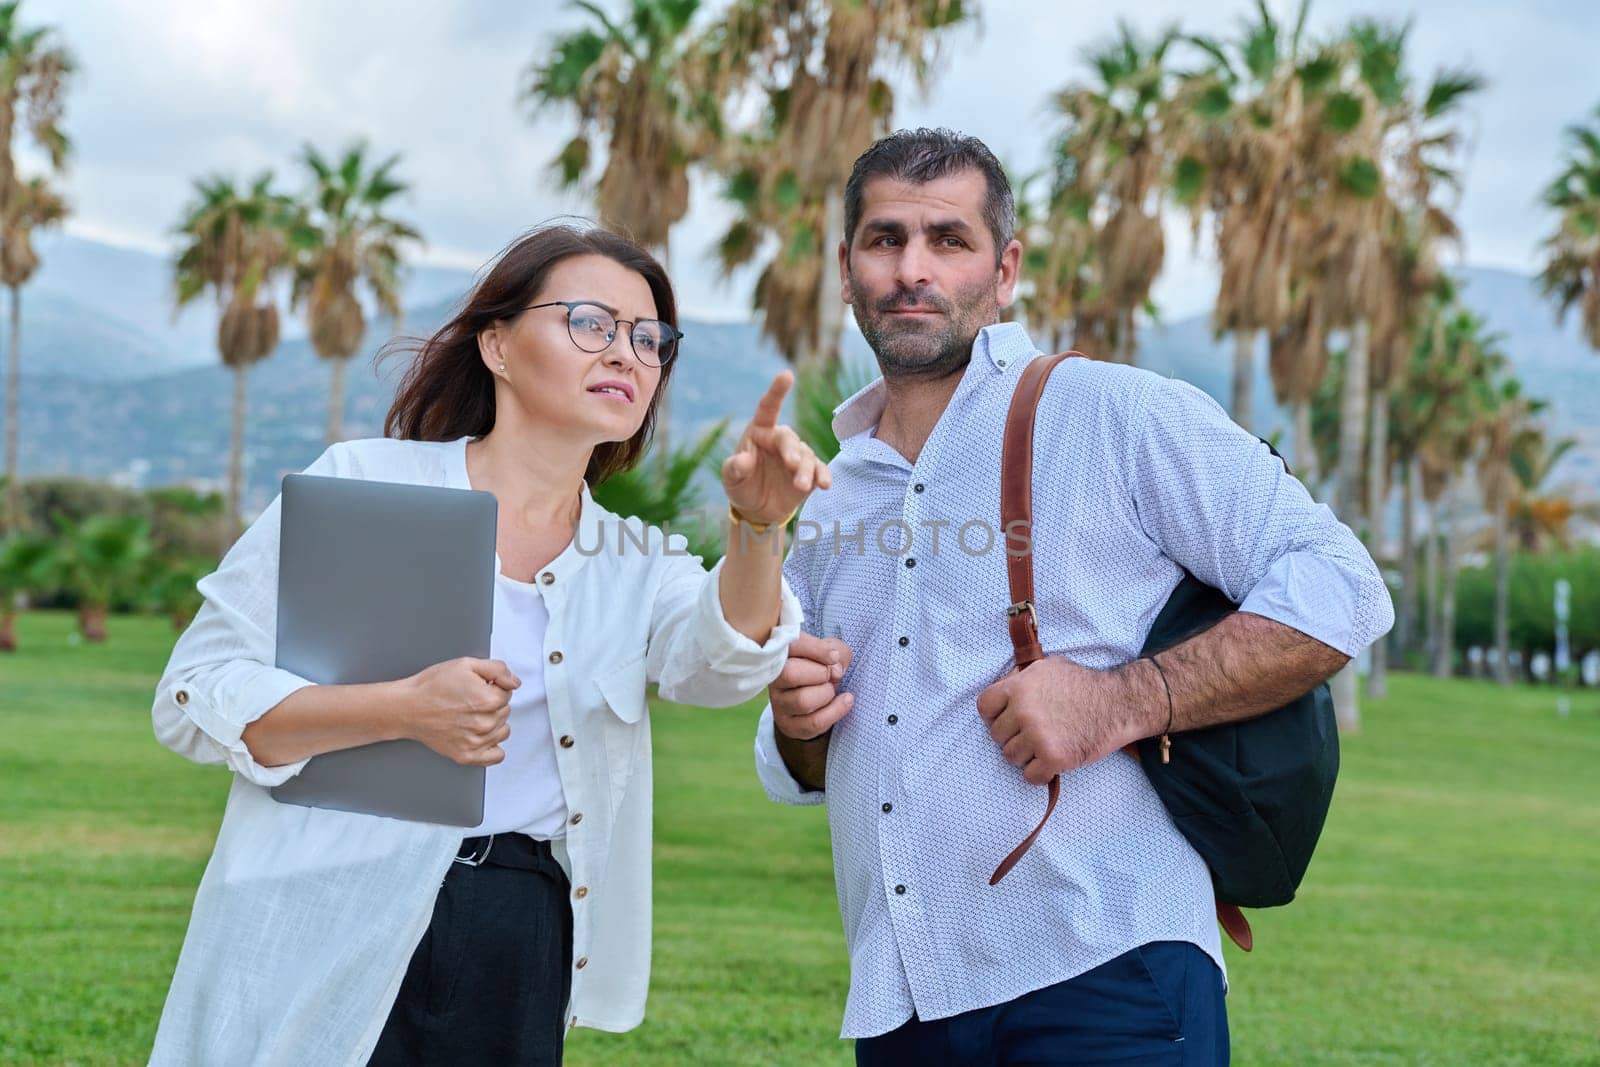 Middle aged business colleagues talking in the park. Mature man with backpack and woman with laptop meeting outdoors, positive smiling communicating